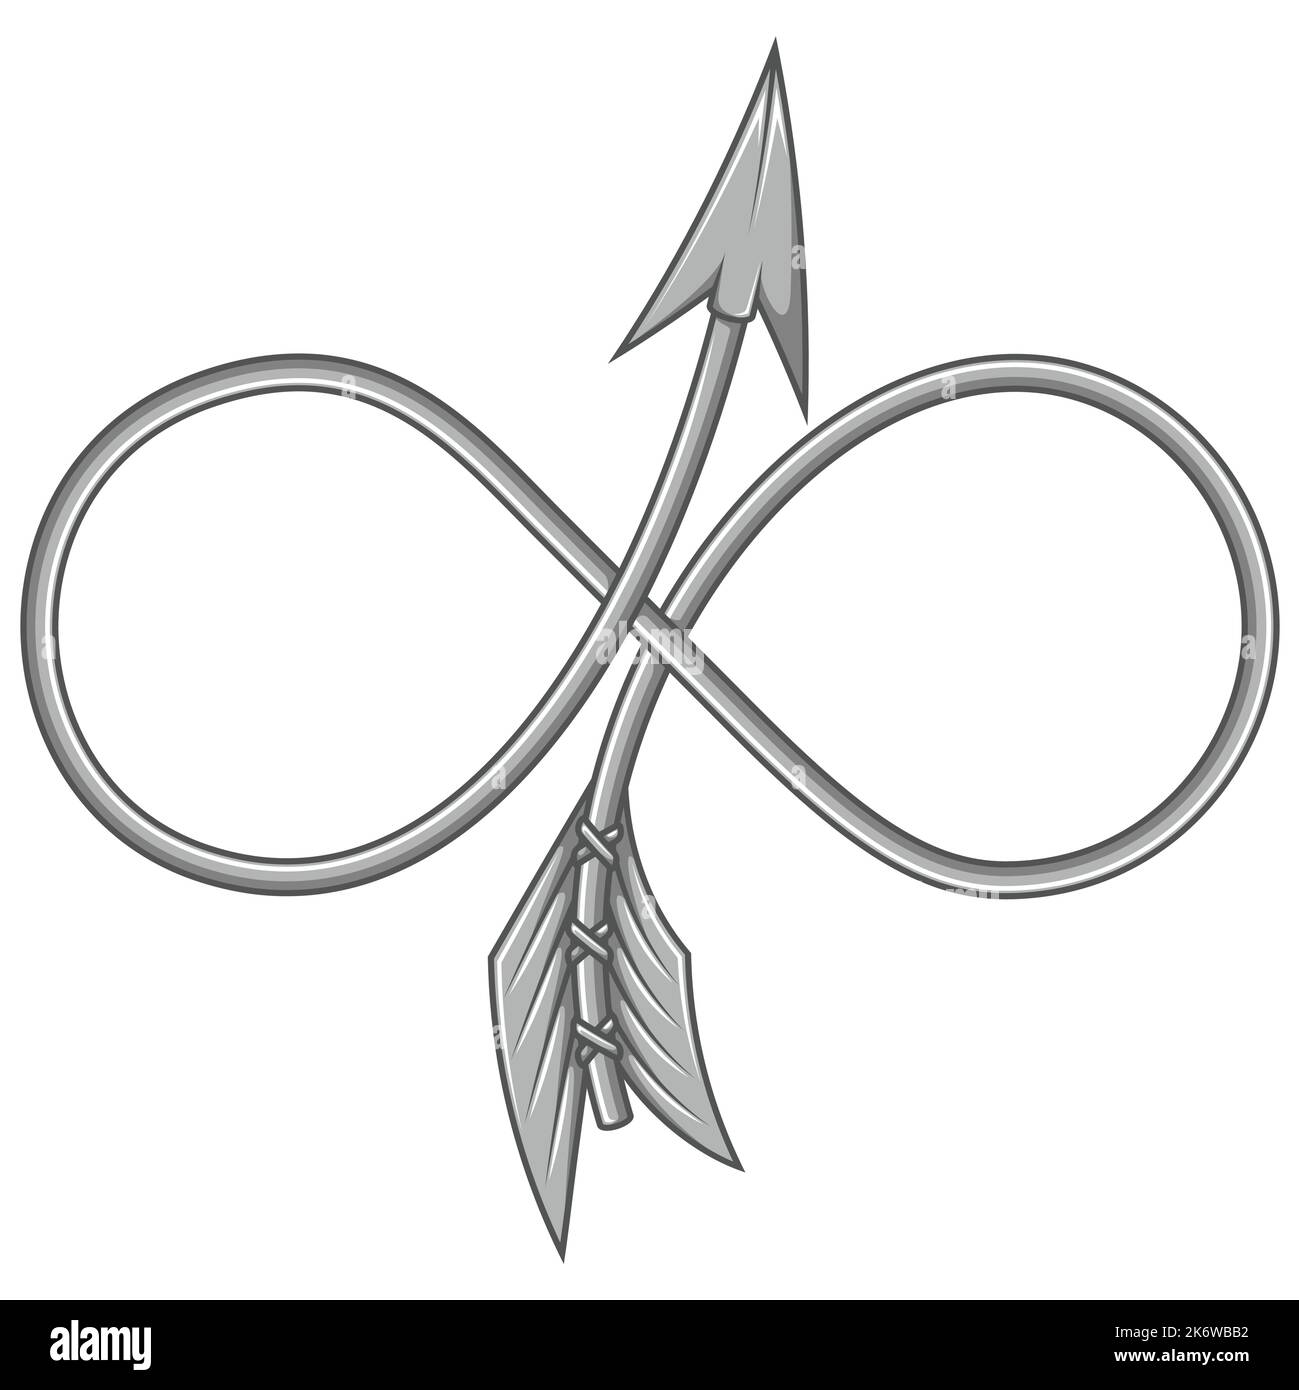 Vector design of curved arrow in the shape of the infinity symbol Stock Vector